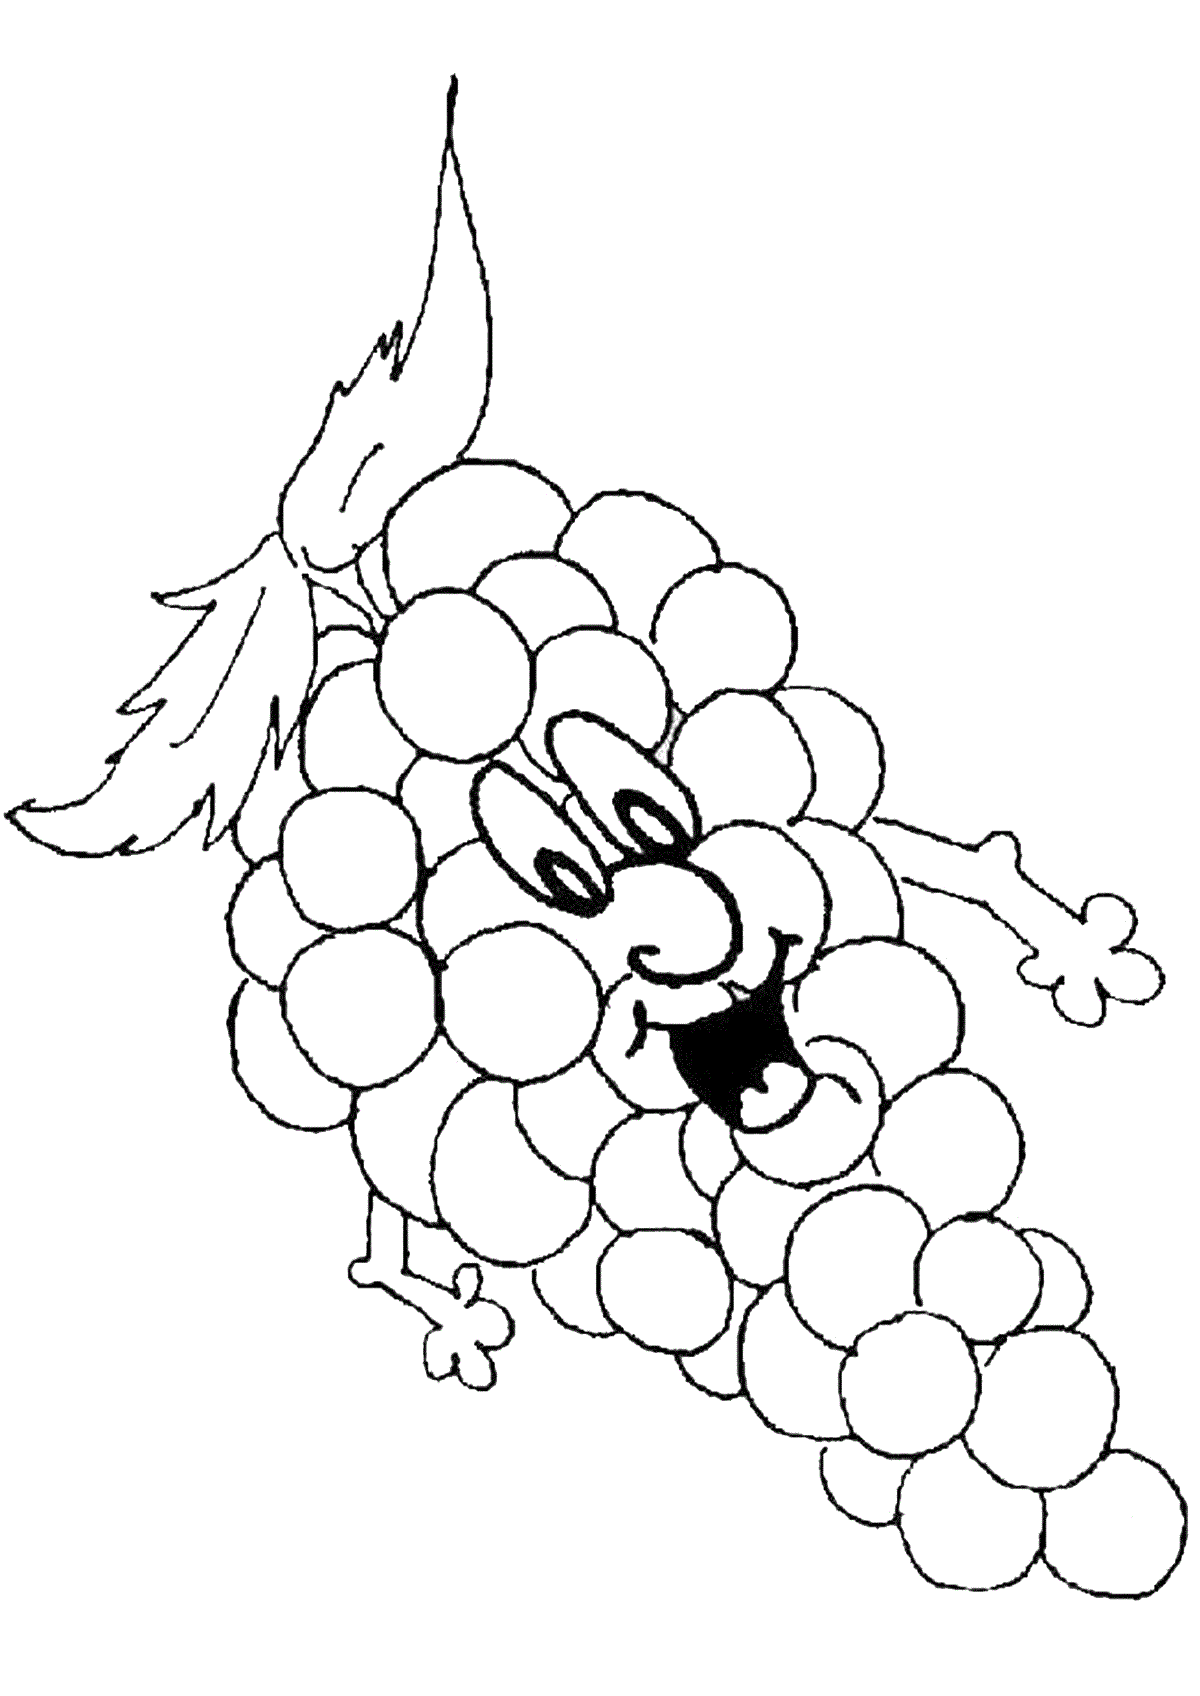 Grapes coloring pages to download and print for free